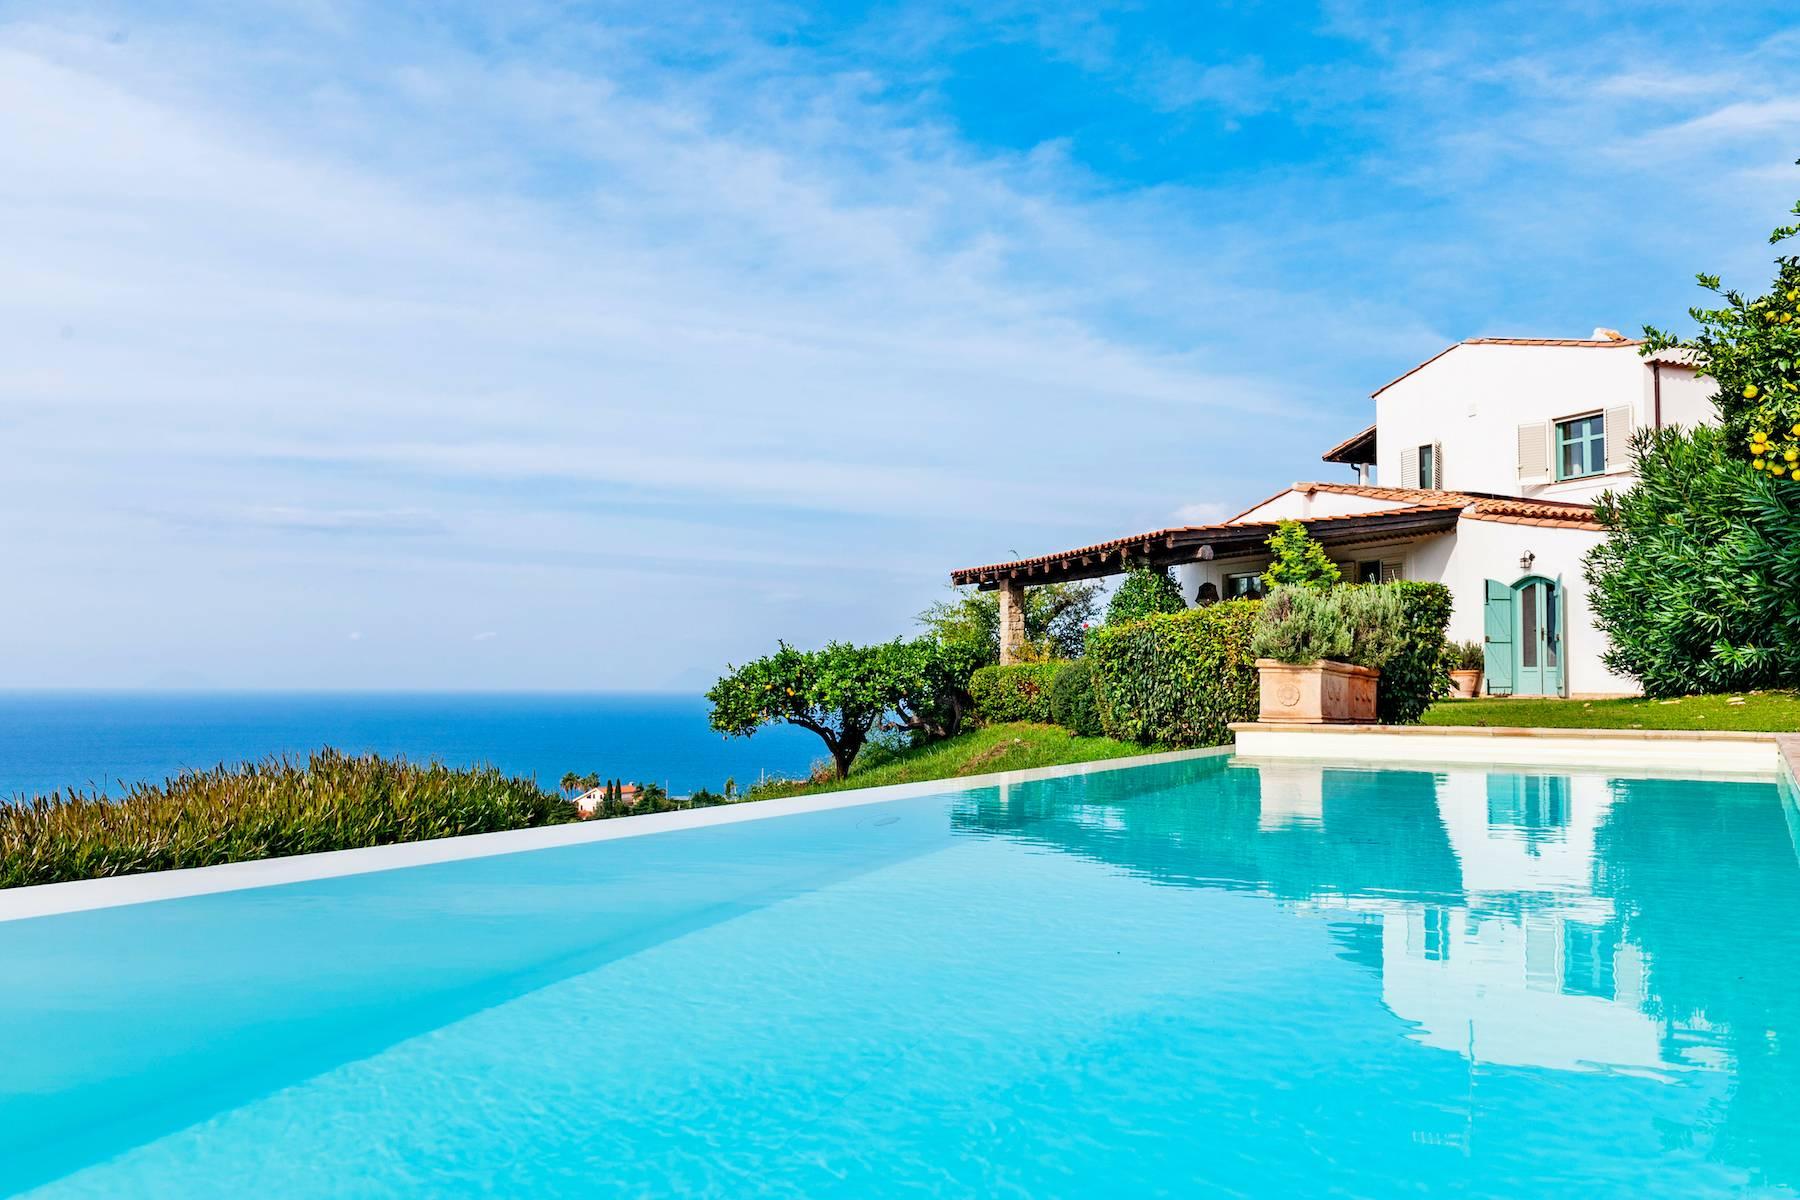 Charming villa with private pool overlooking the Eeolian Islands - 1